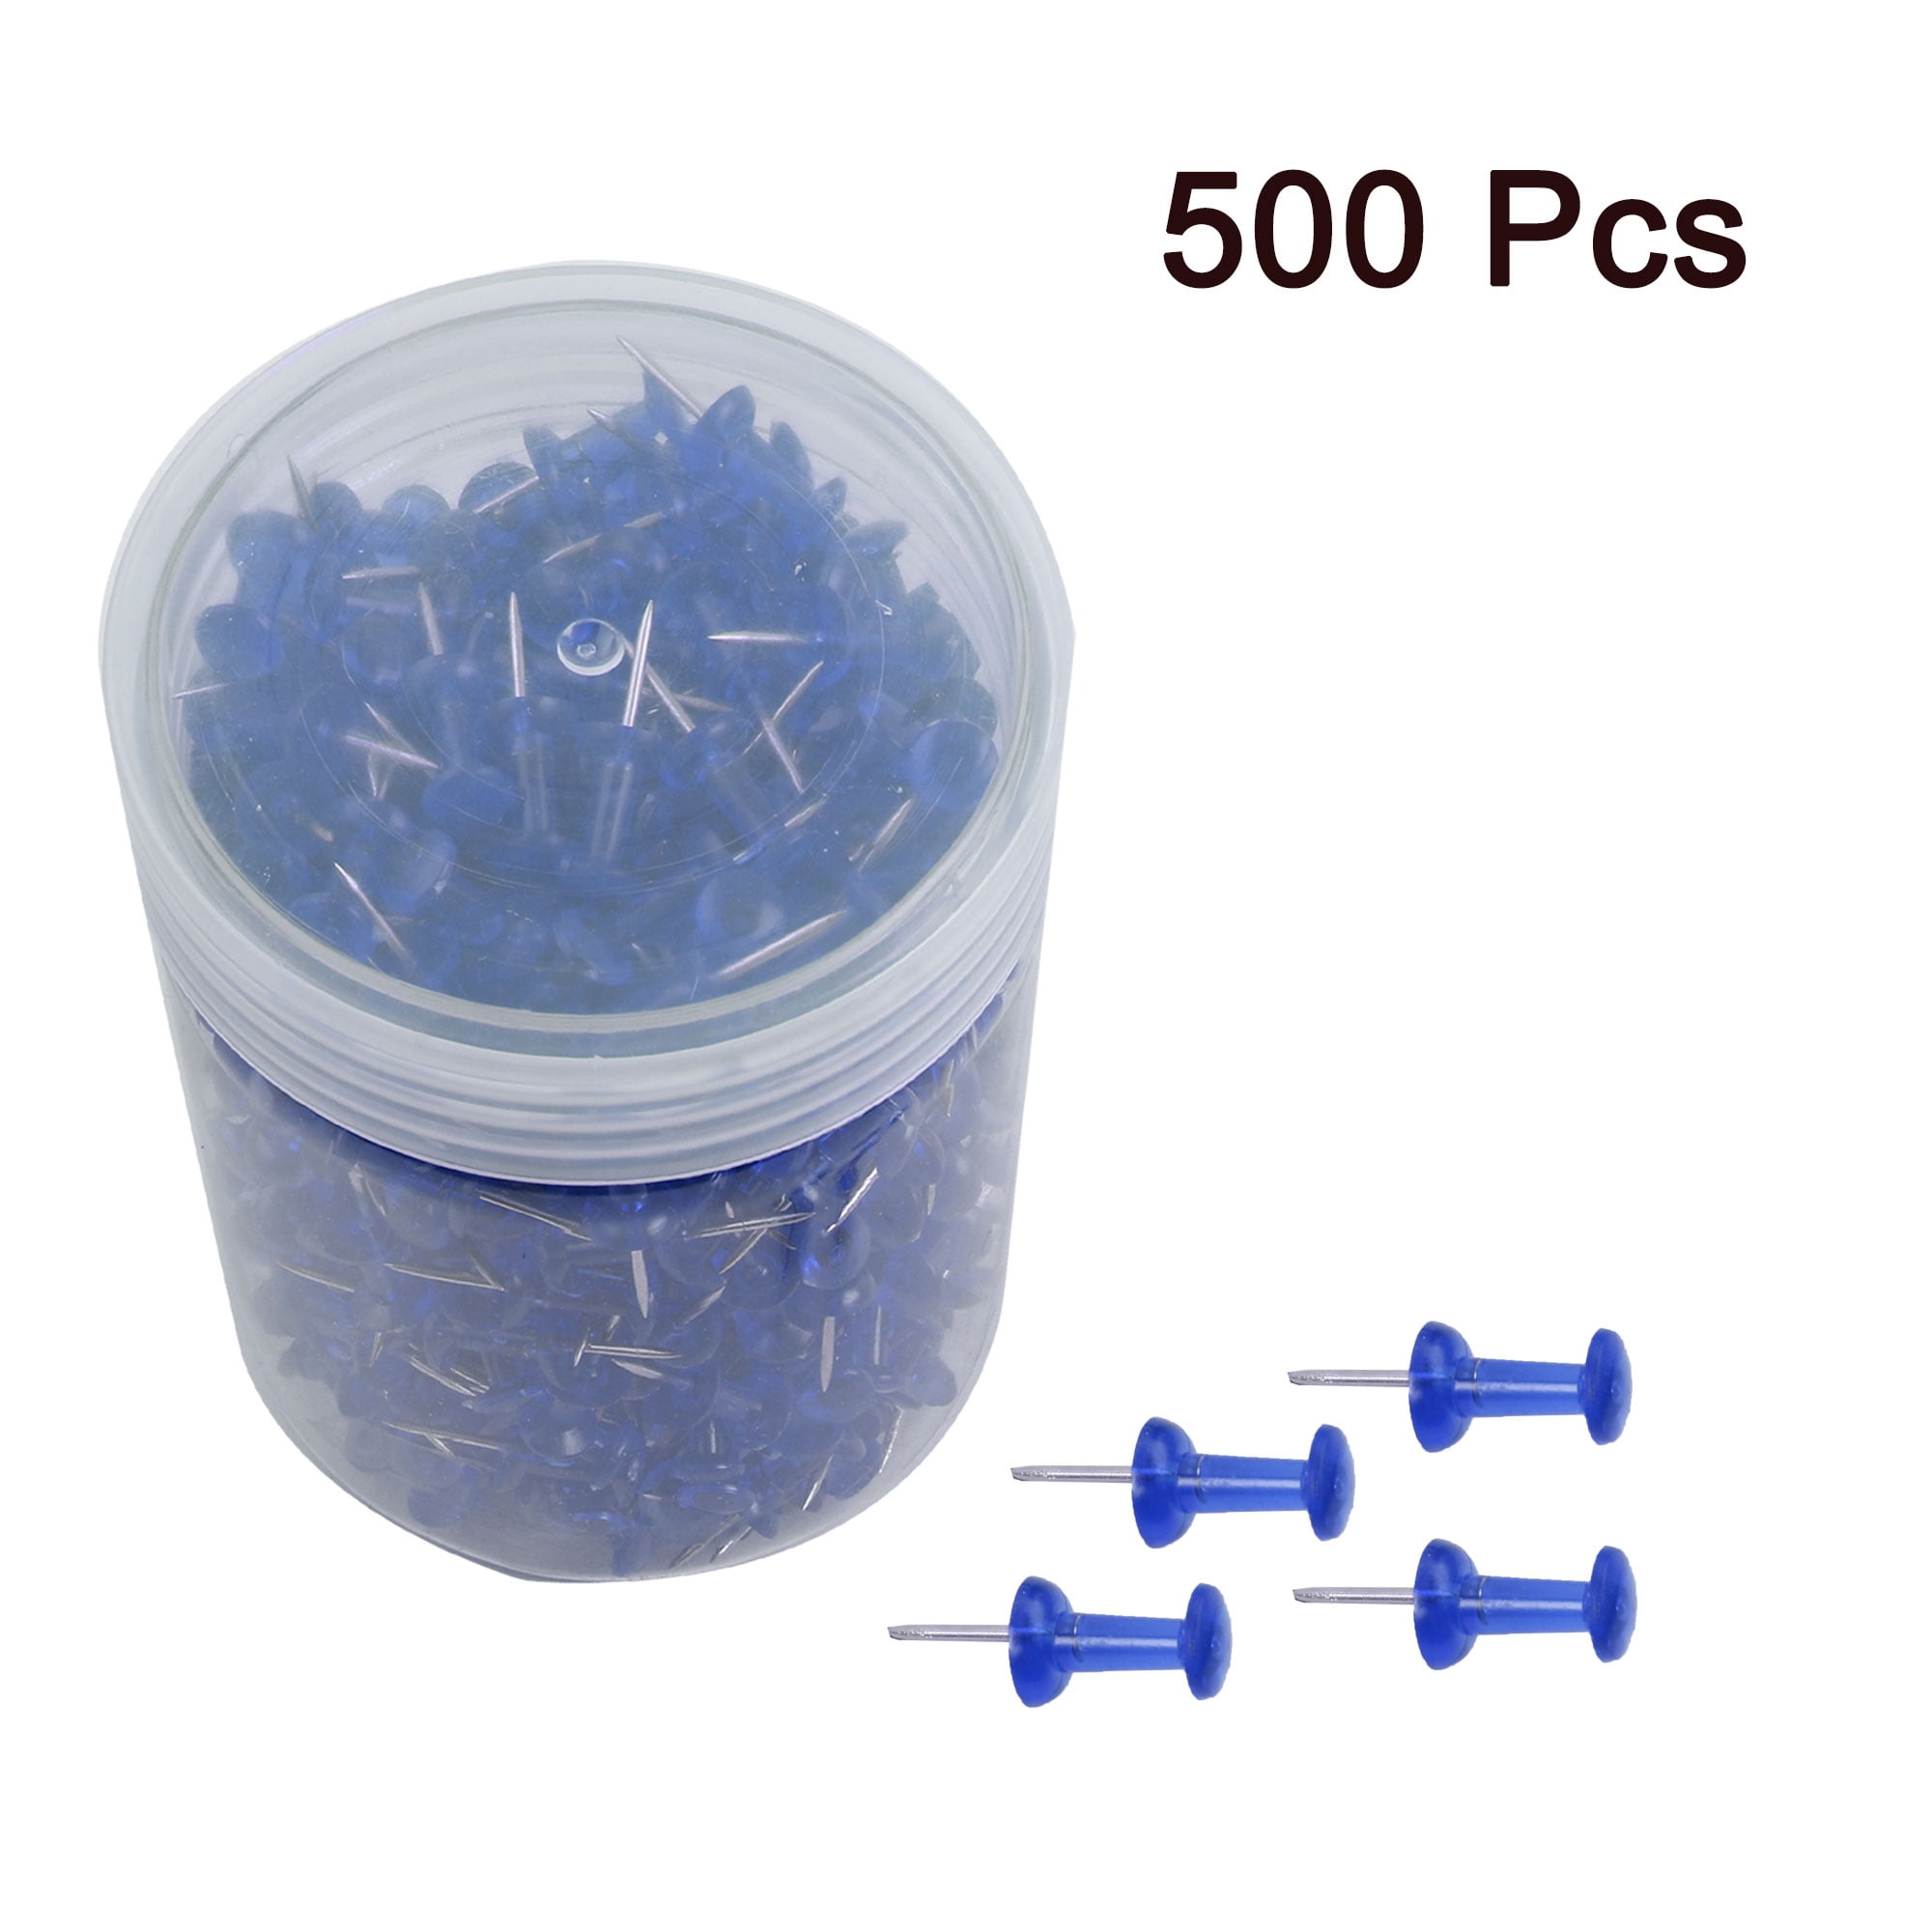 500 Pcs 3/8 Inch Push Pins Thumb Tacks for Home Office Cork Boards Map Note  Picture Hanging Blue 